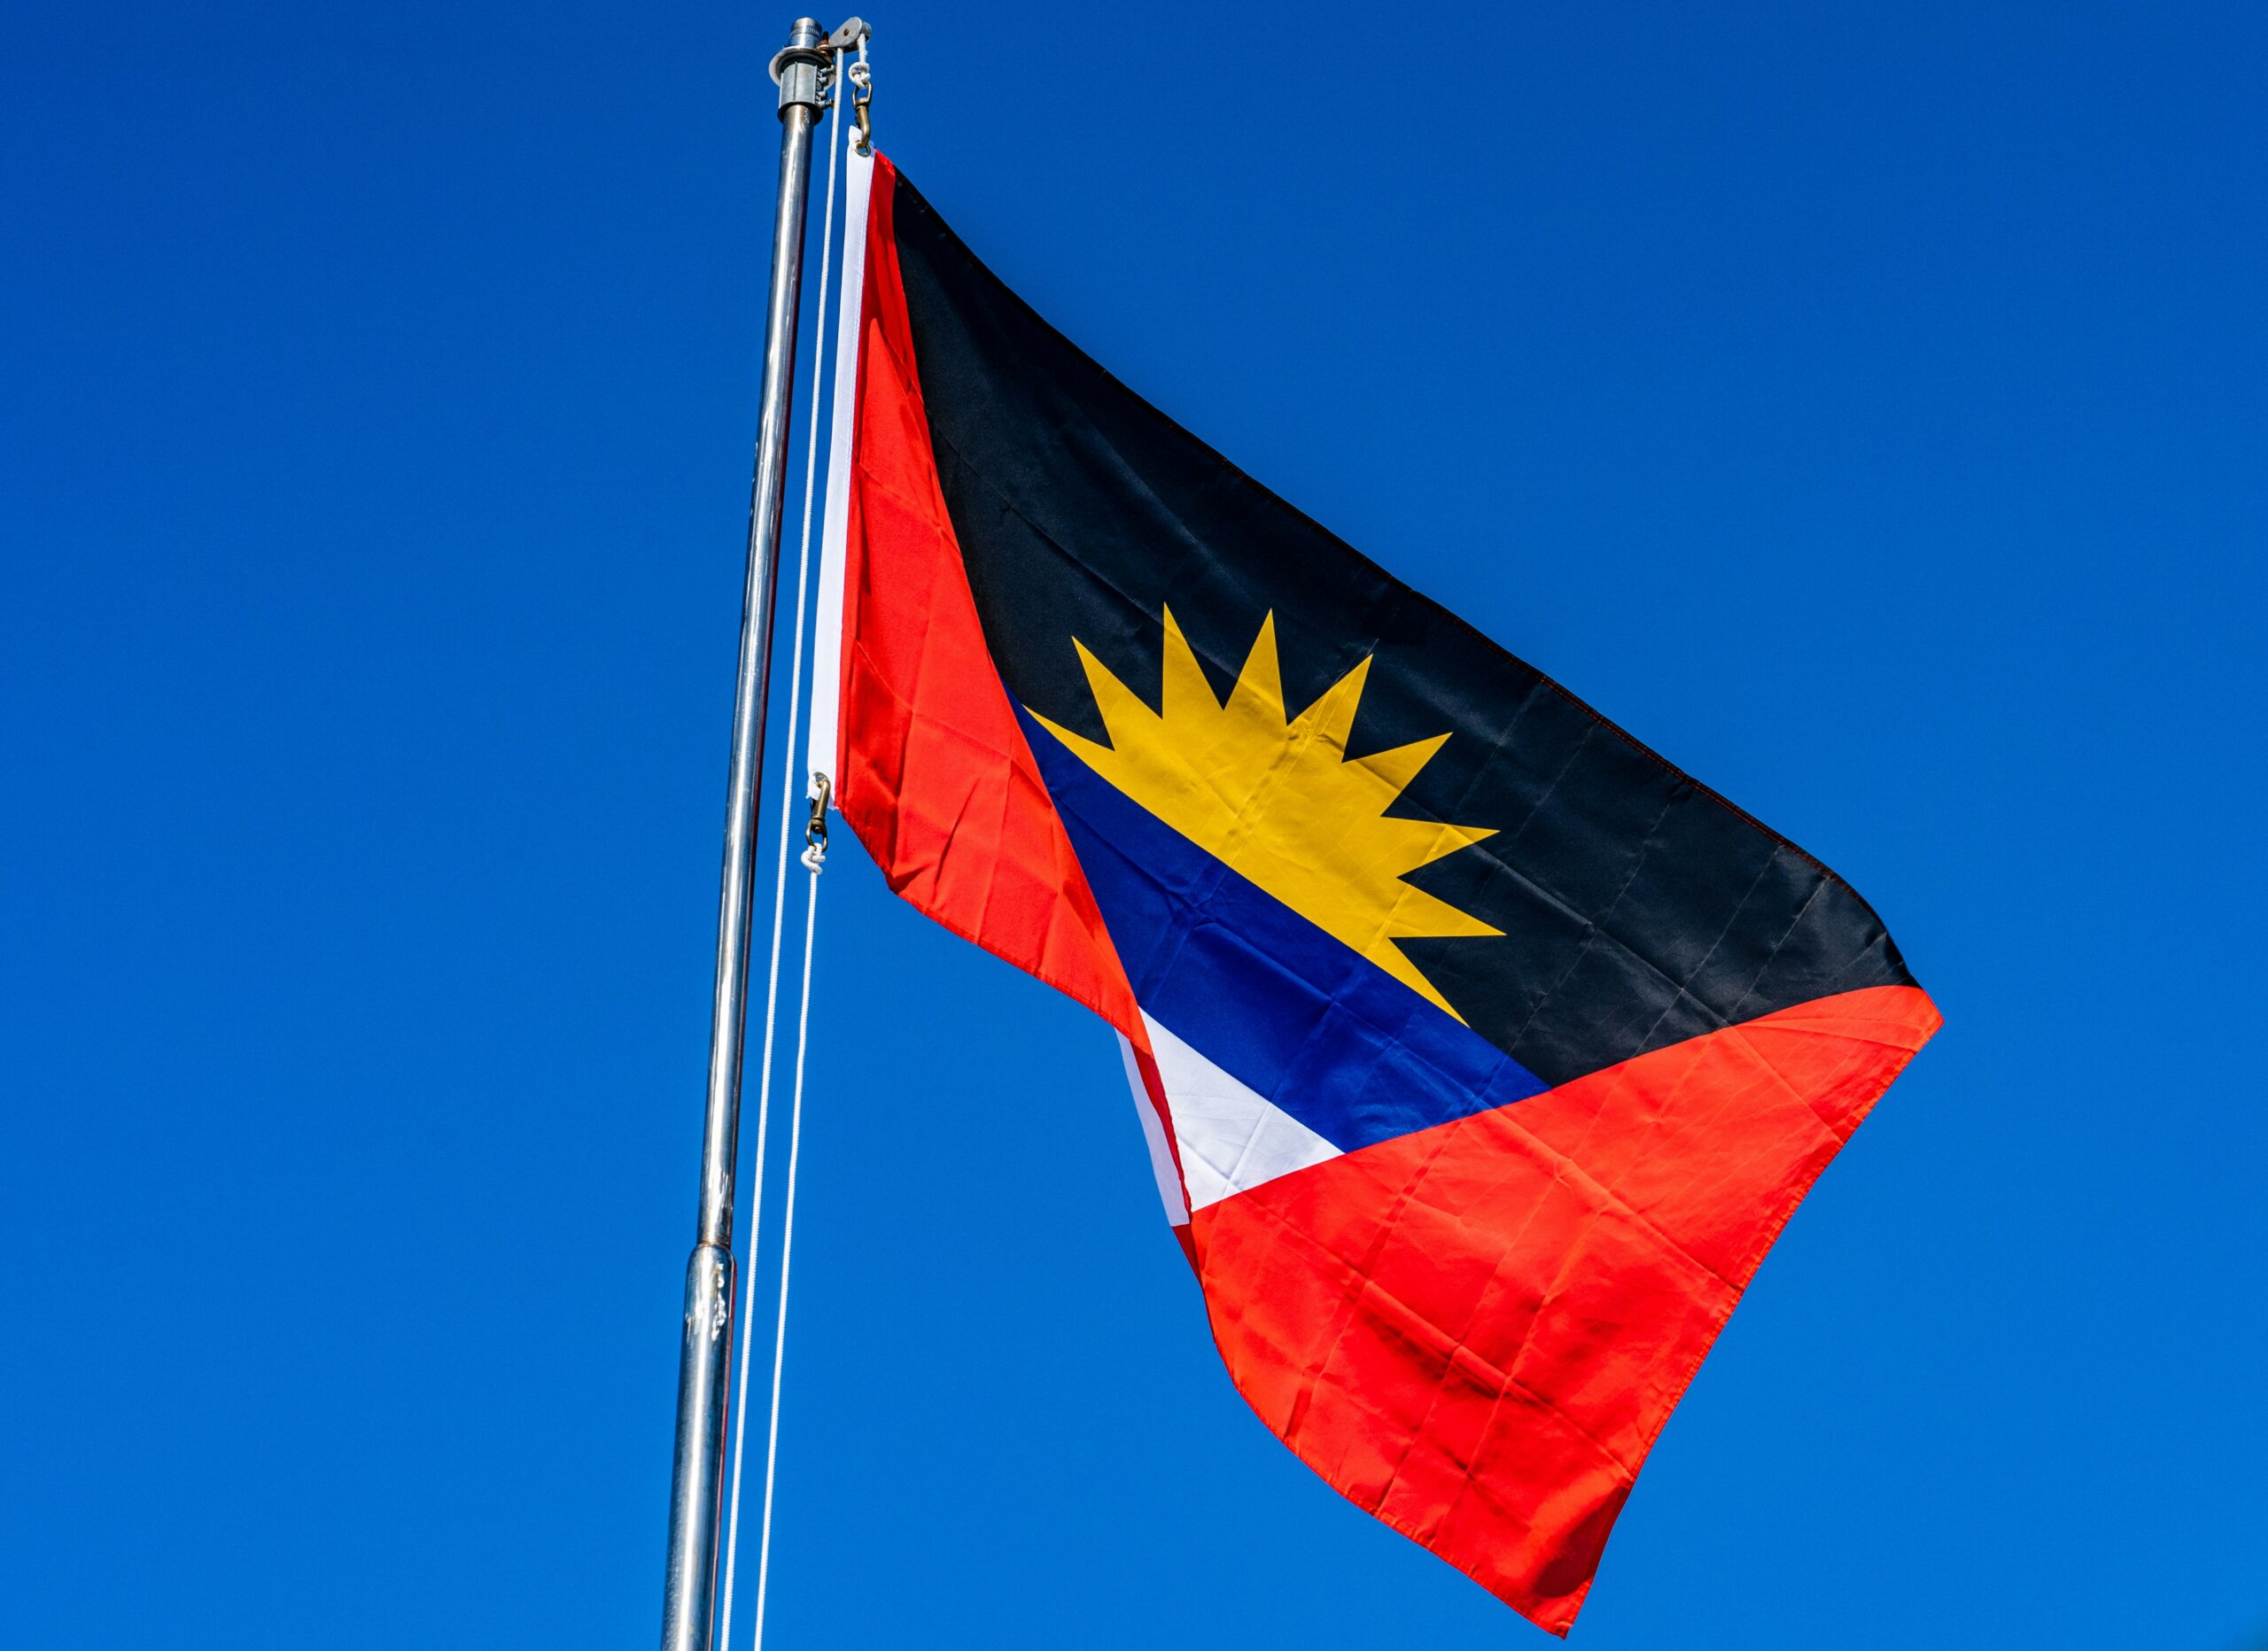 There are historic sites in Antigua that travelers can explore during their trip abroad. 
Pictured: the Antigua flag